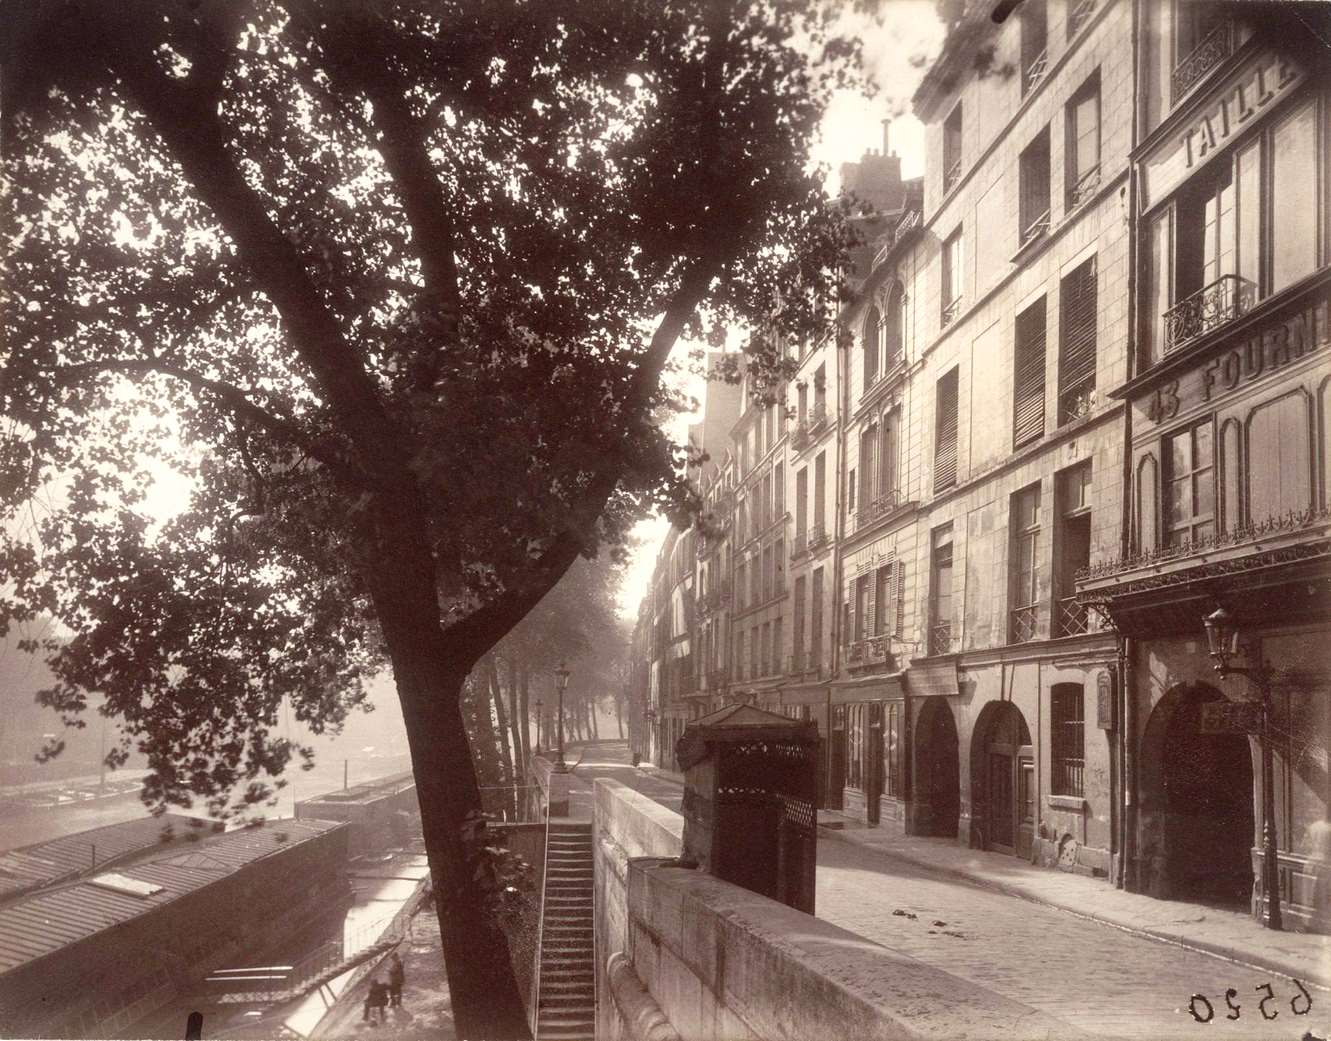 The quay of Anjou on the morning in Paris, 1924